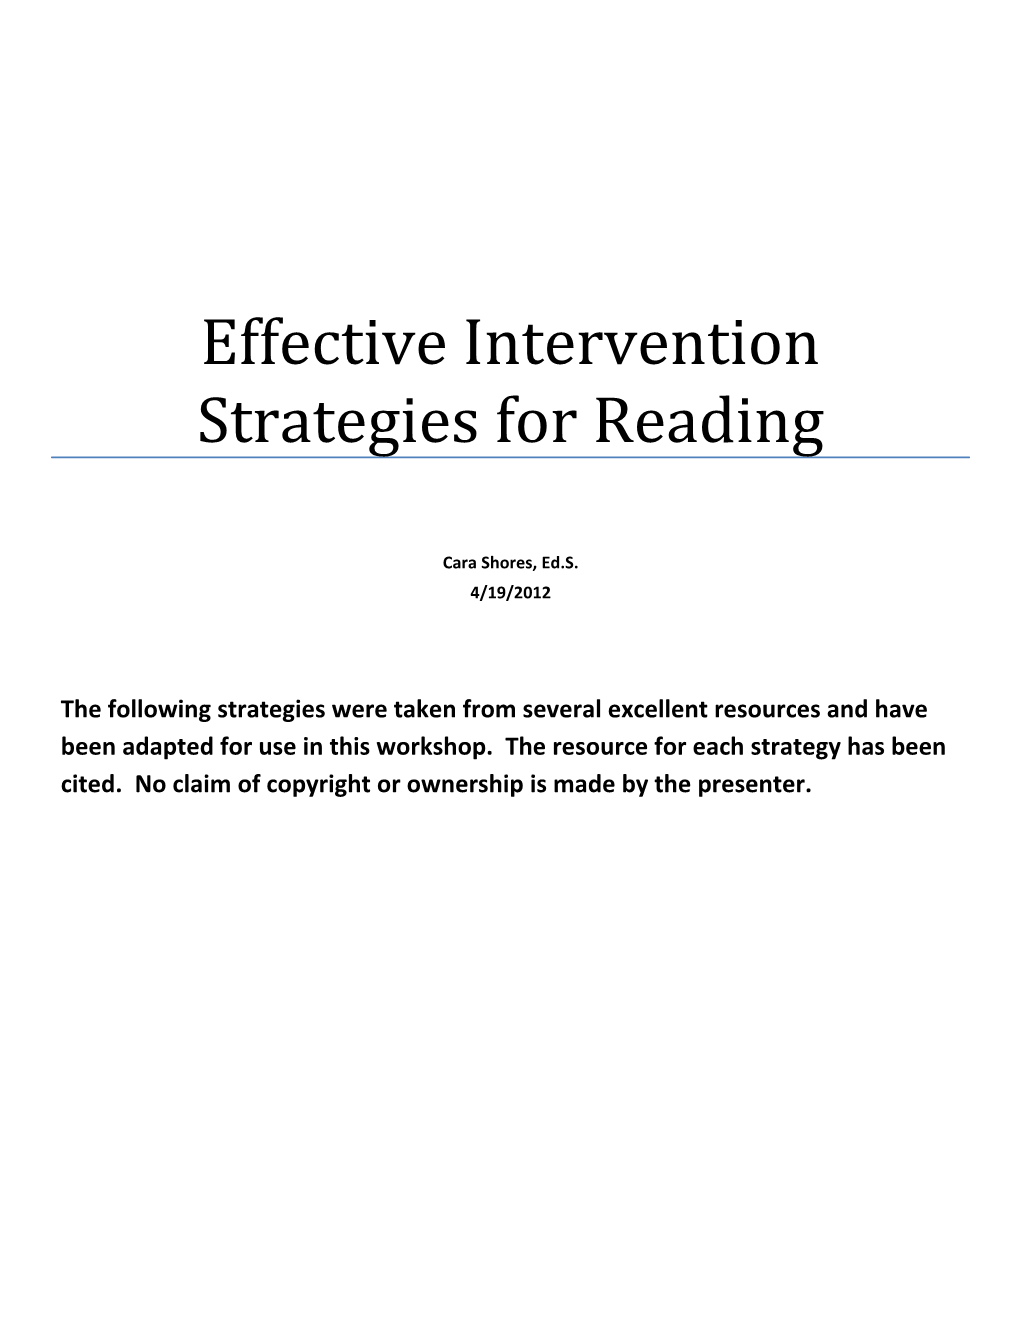 Effective Intervention Strategies for Reading